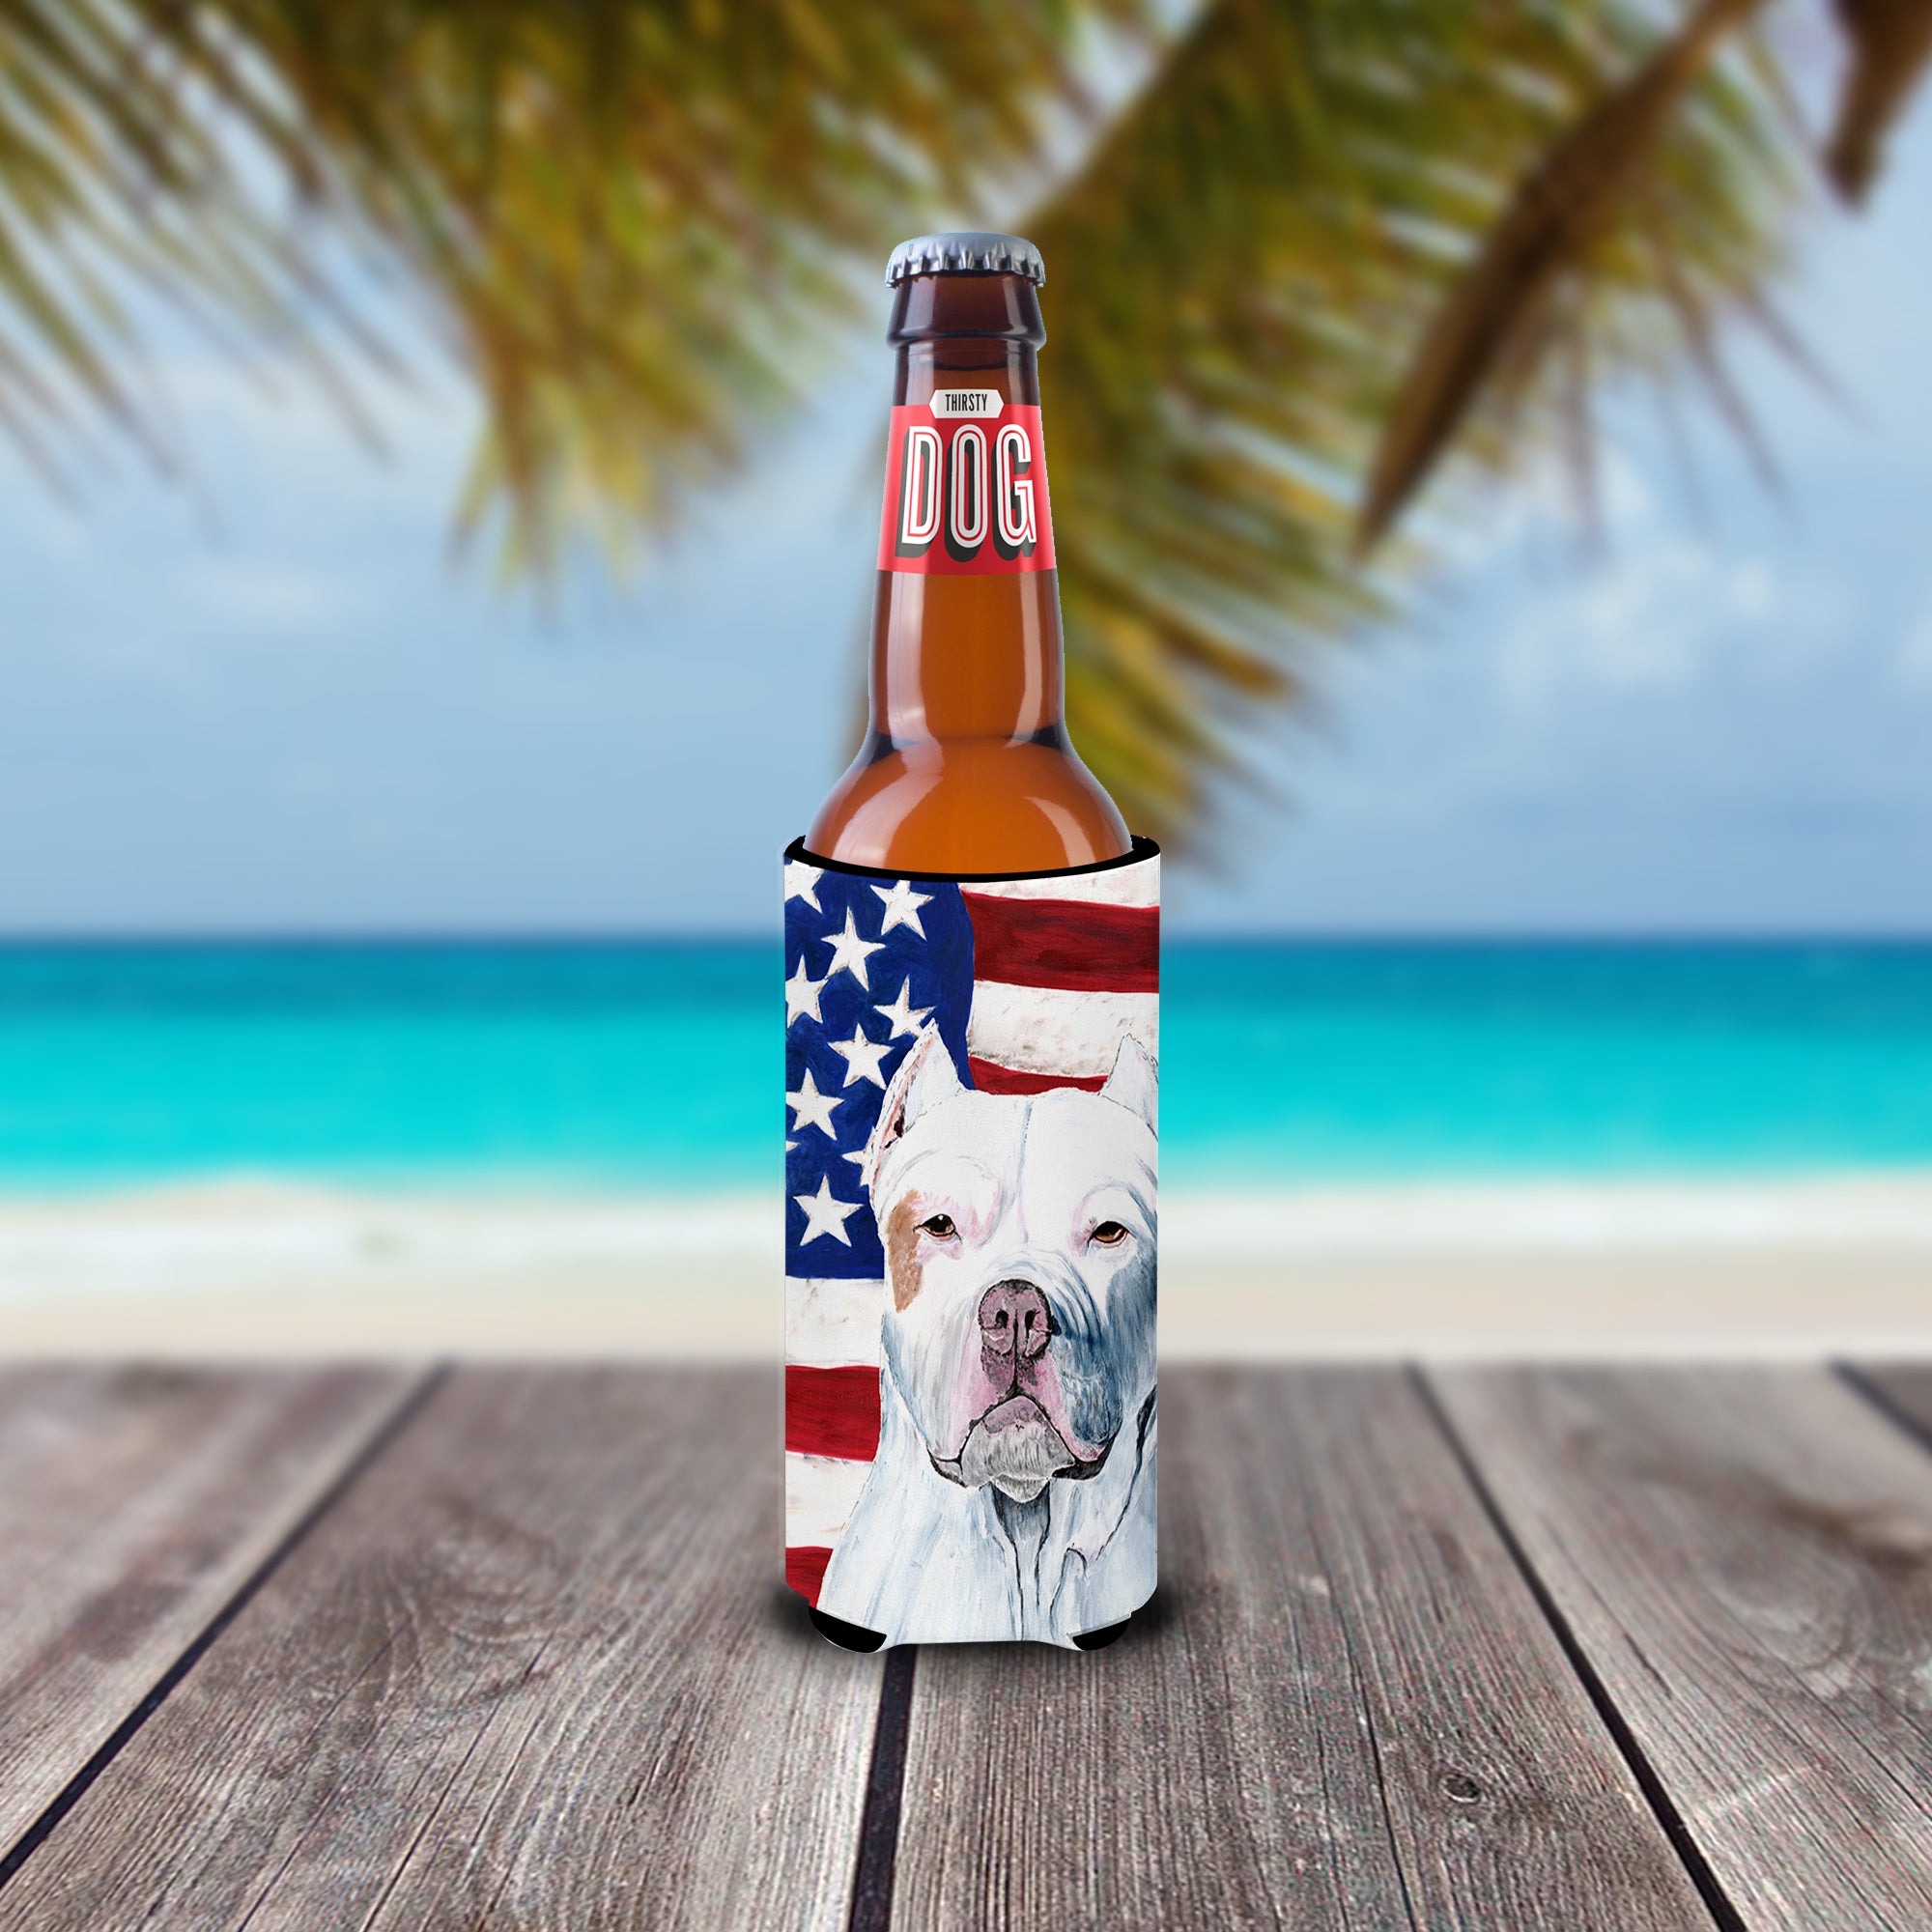 USA American Flag with Pit Bull Ultra Beverage Insulators for slim cans SC9026MUK.